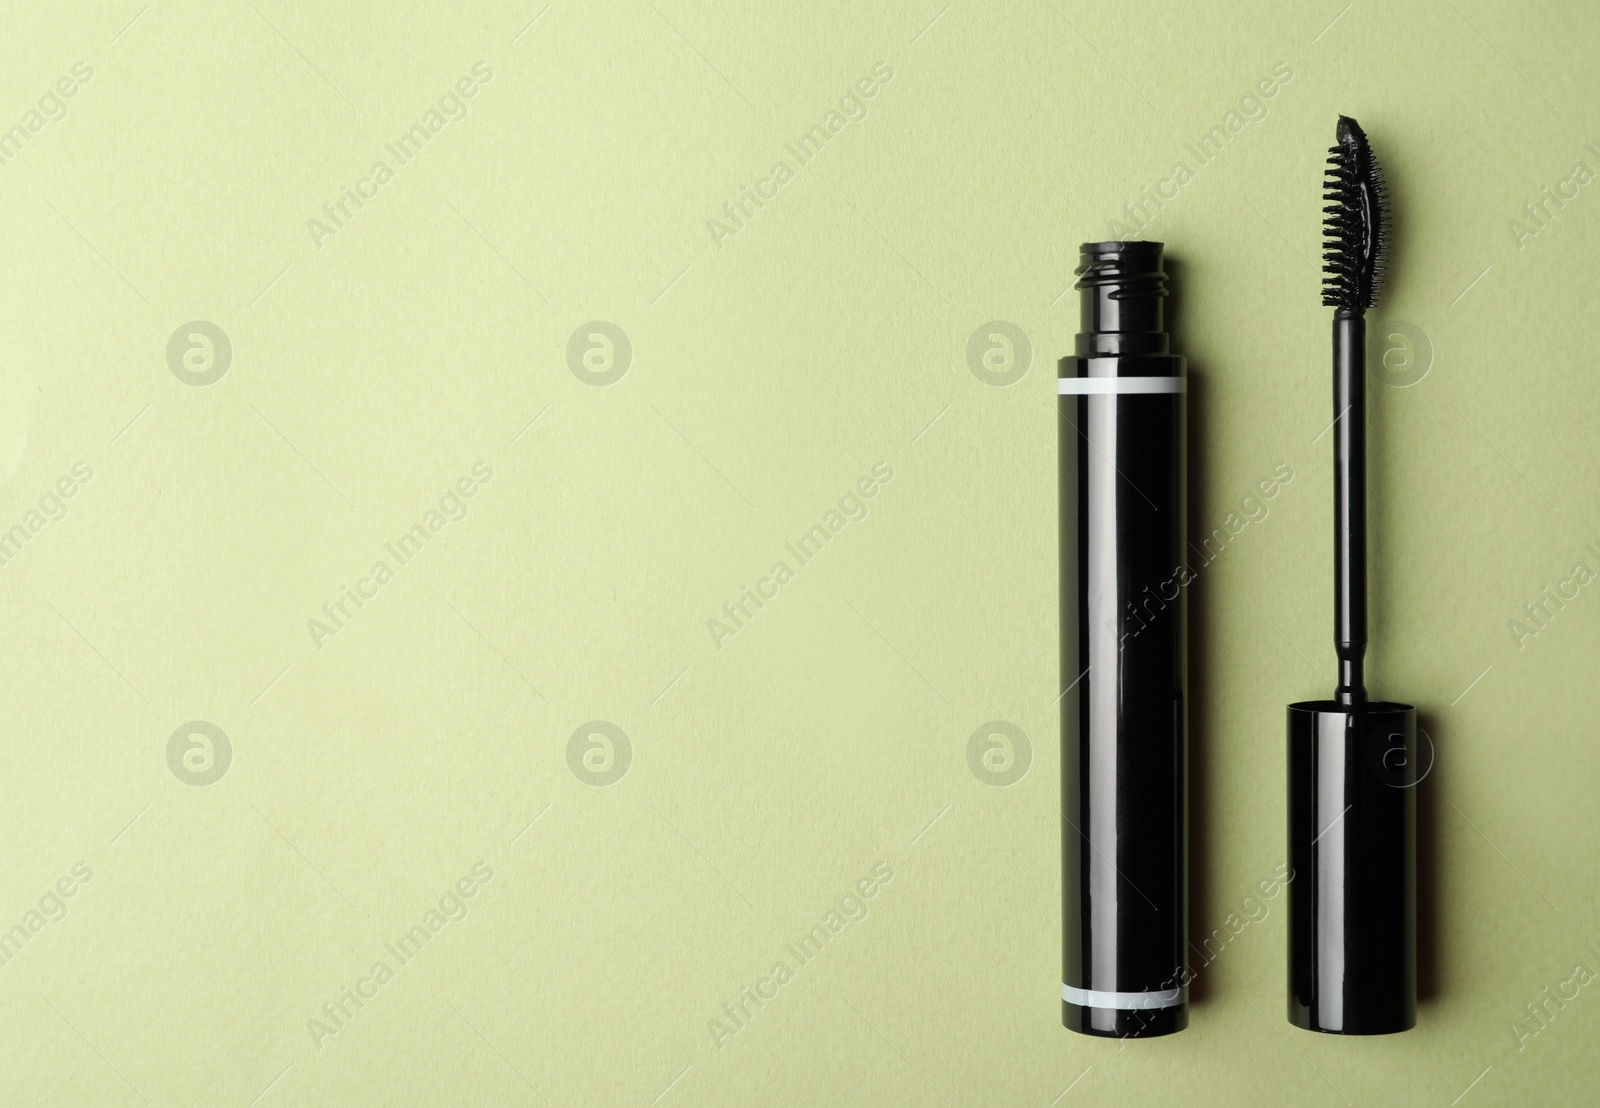 Photo of Mascara on light background, flat lay with space for text. Makeup product